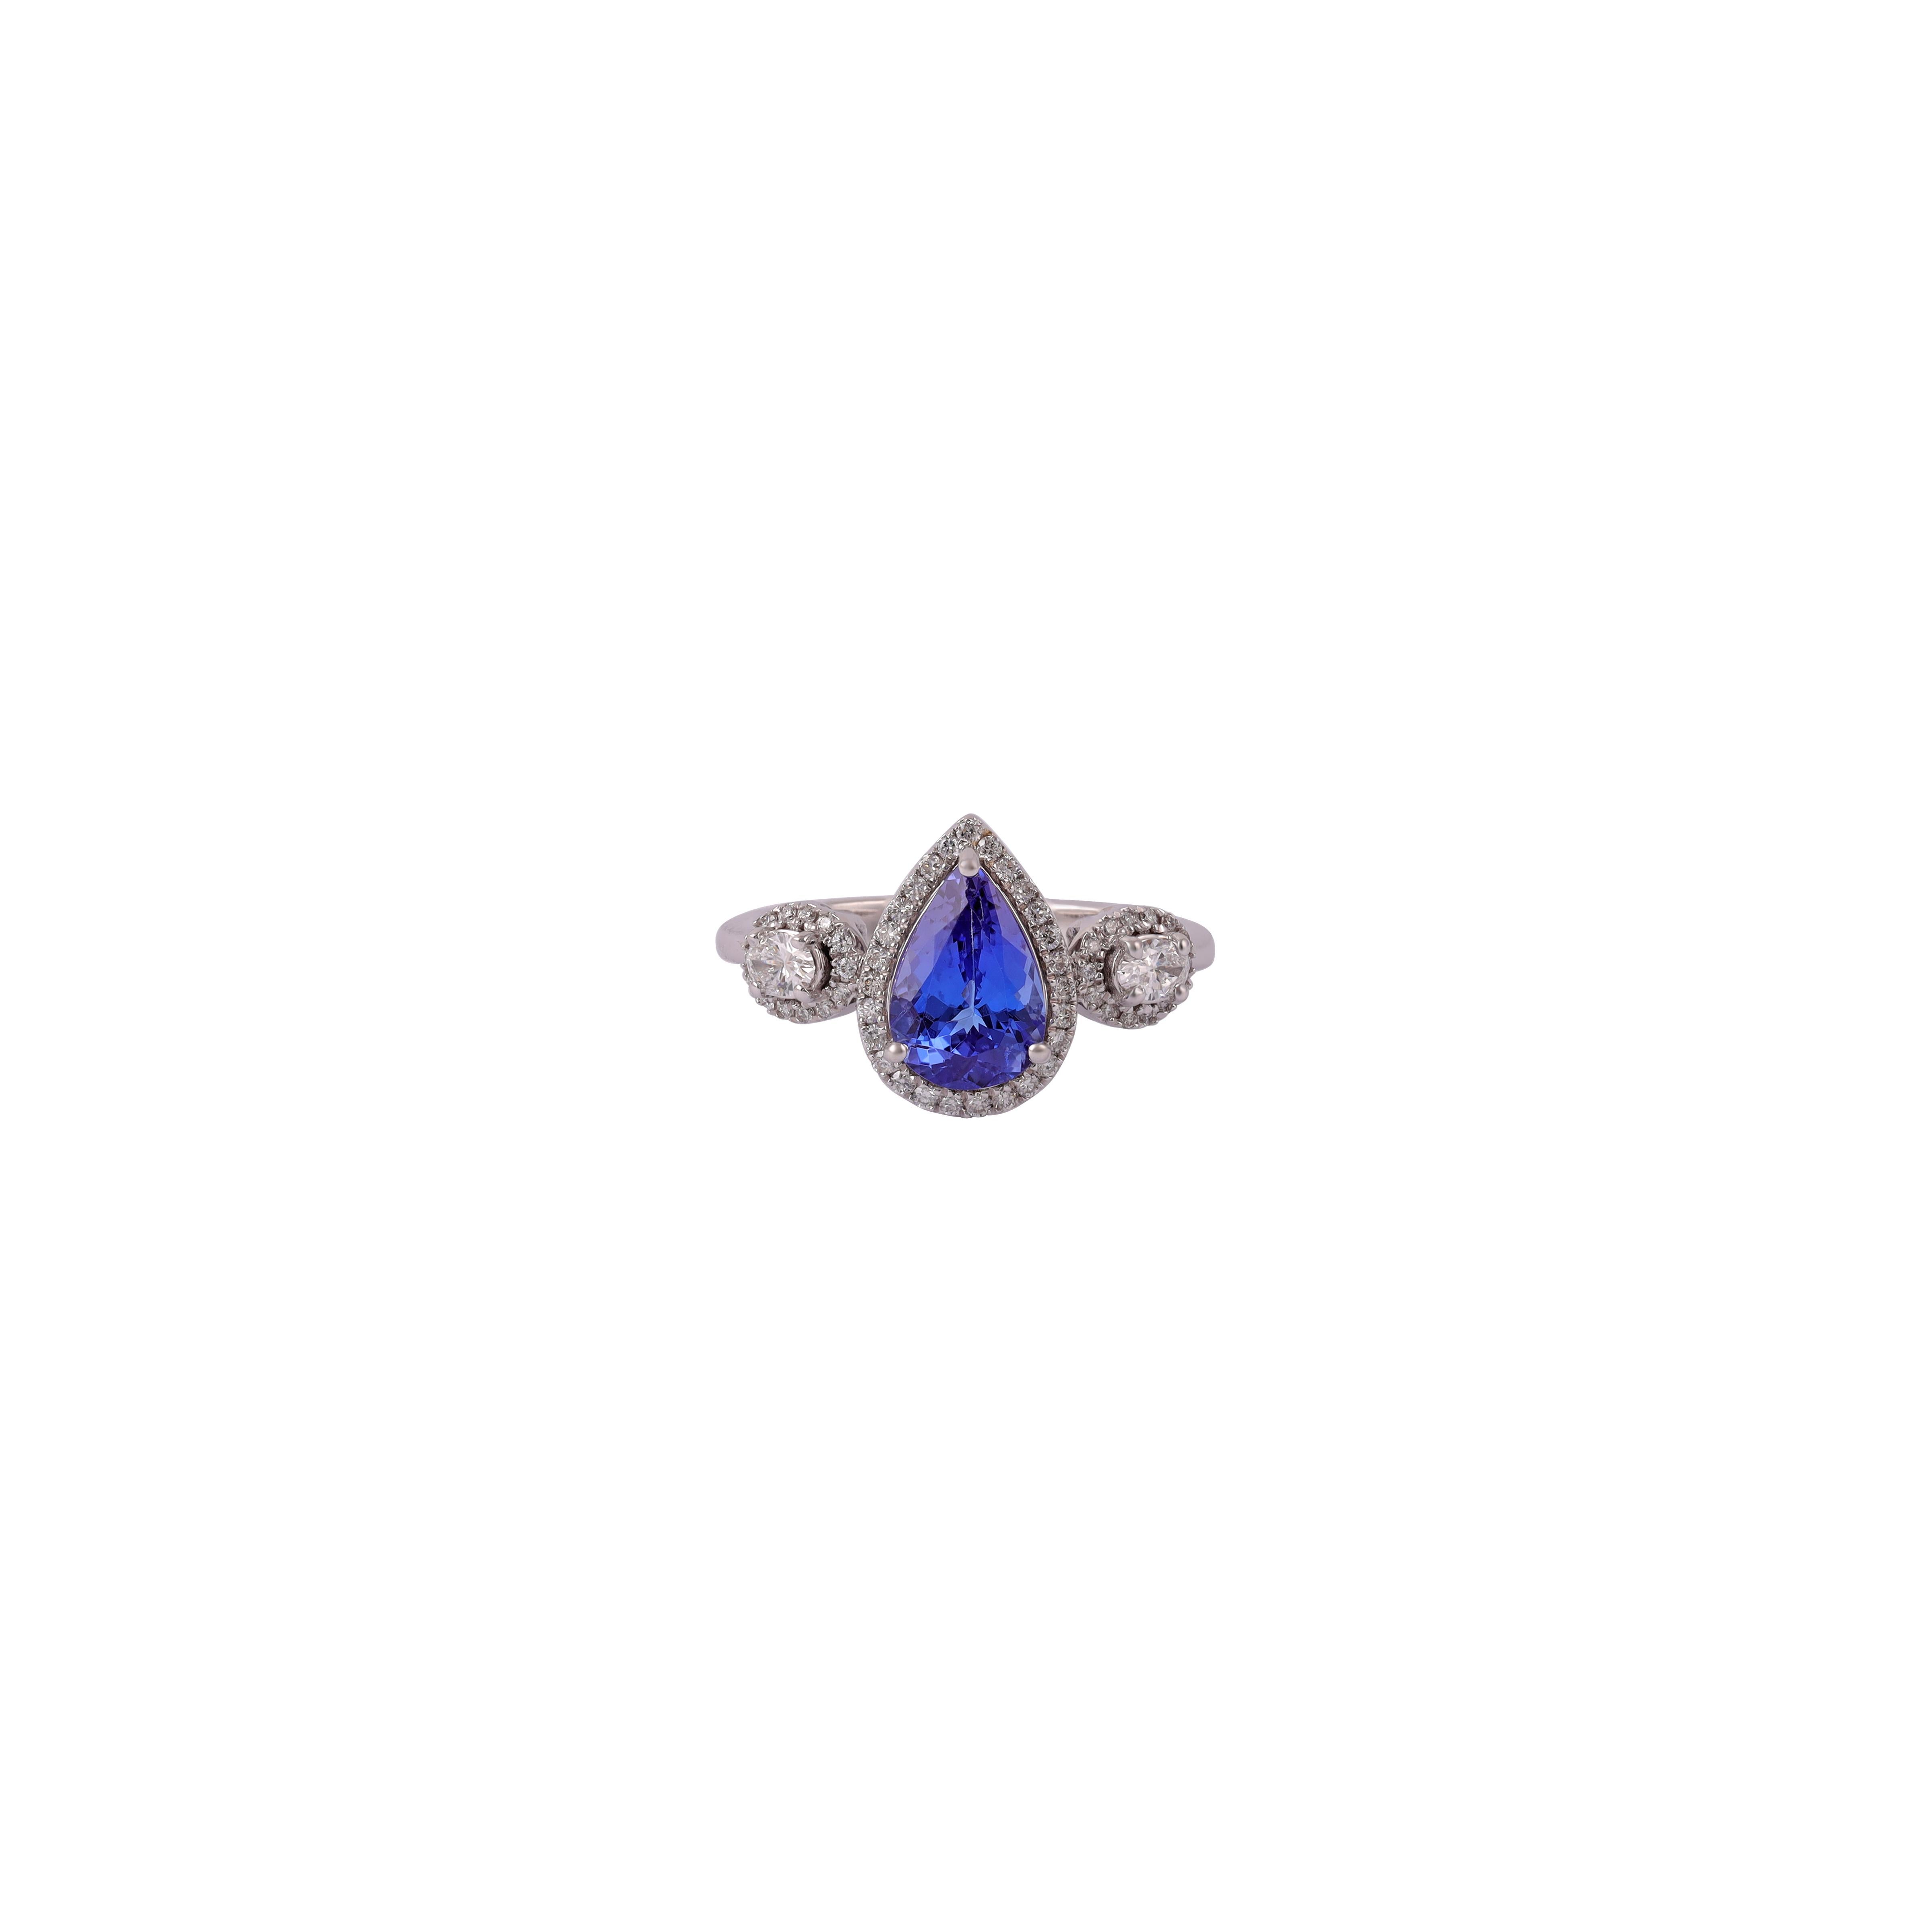 Exclusive tanzanite & diamond ring studded in 18k white gold
1 Radiant Tanzanite in 1.50 CTS
Diamond  0.32 CTS
18 k White gold 2.96 GMS

Custom Services
Resizing is available.